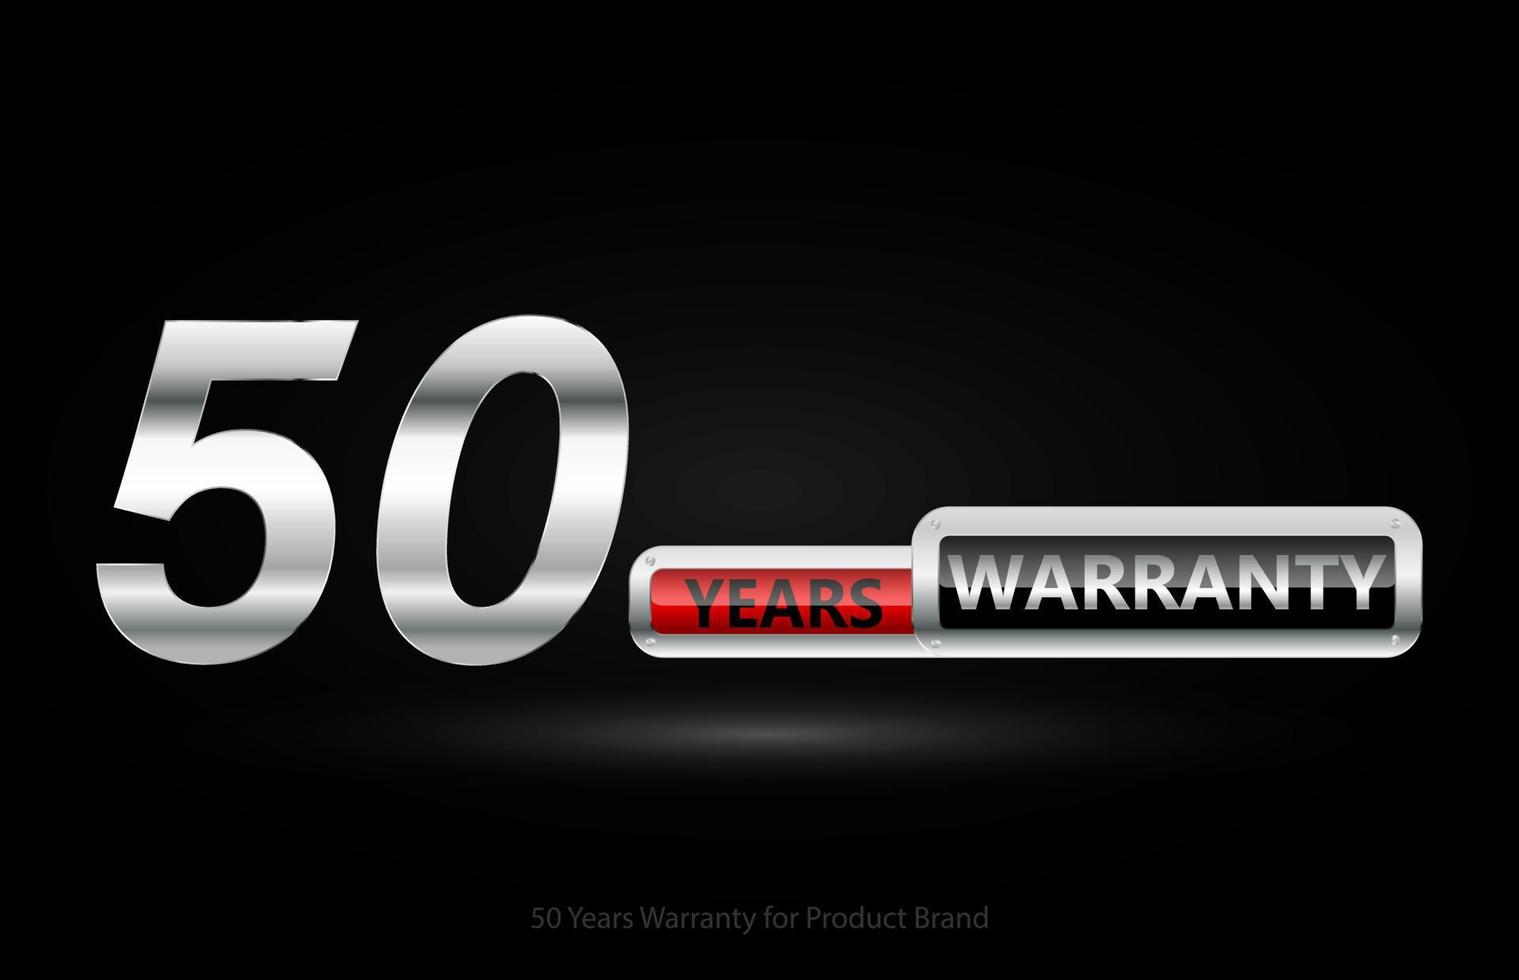 50 years warranty silver logo isolated on black background, vector design for product warranty, guarantee, service, corporate, and your business.